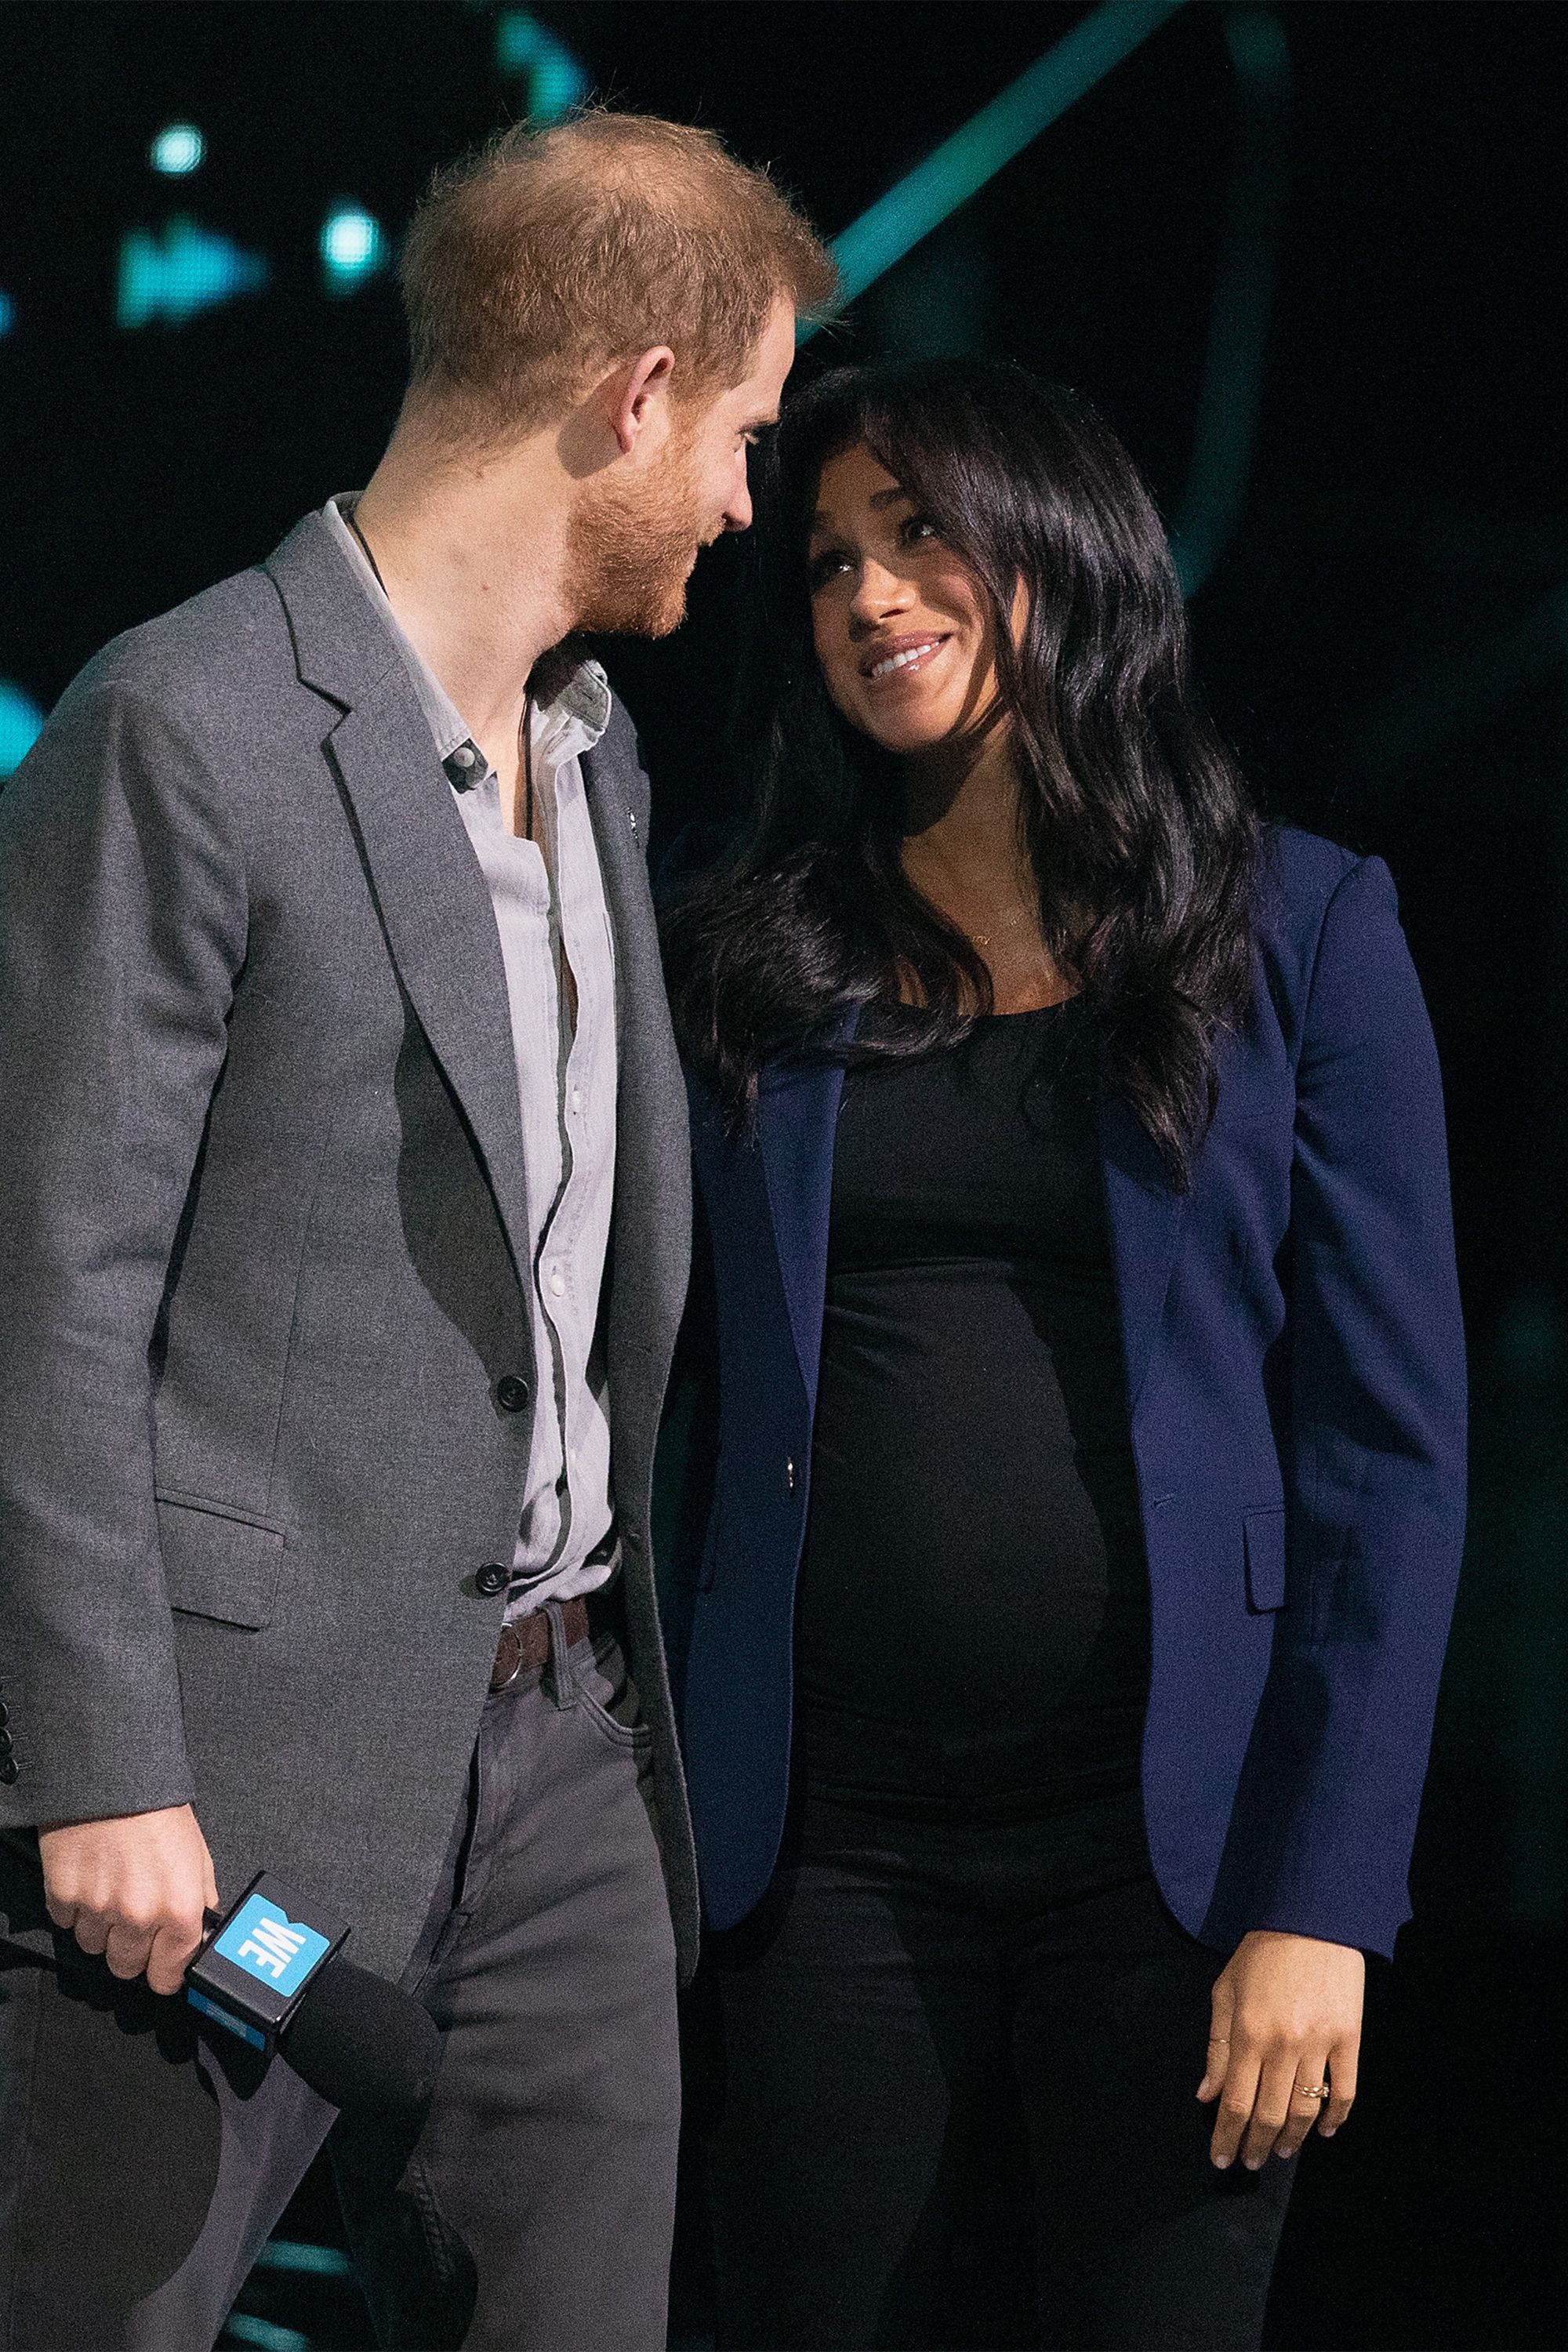 https://hips.hearstapps.com/hmg-prod.s3.amazonaws.com/images/hbz-prince-harry-meghan-markle-cute-moments-2019-03-gettyimages-1134000953.jpg?crop=1xw:1xh;center,top